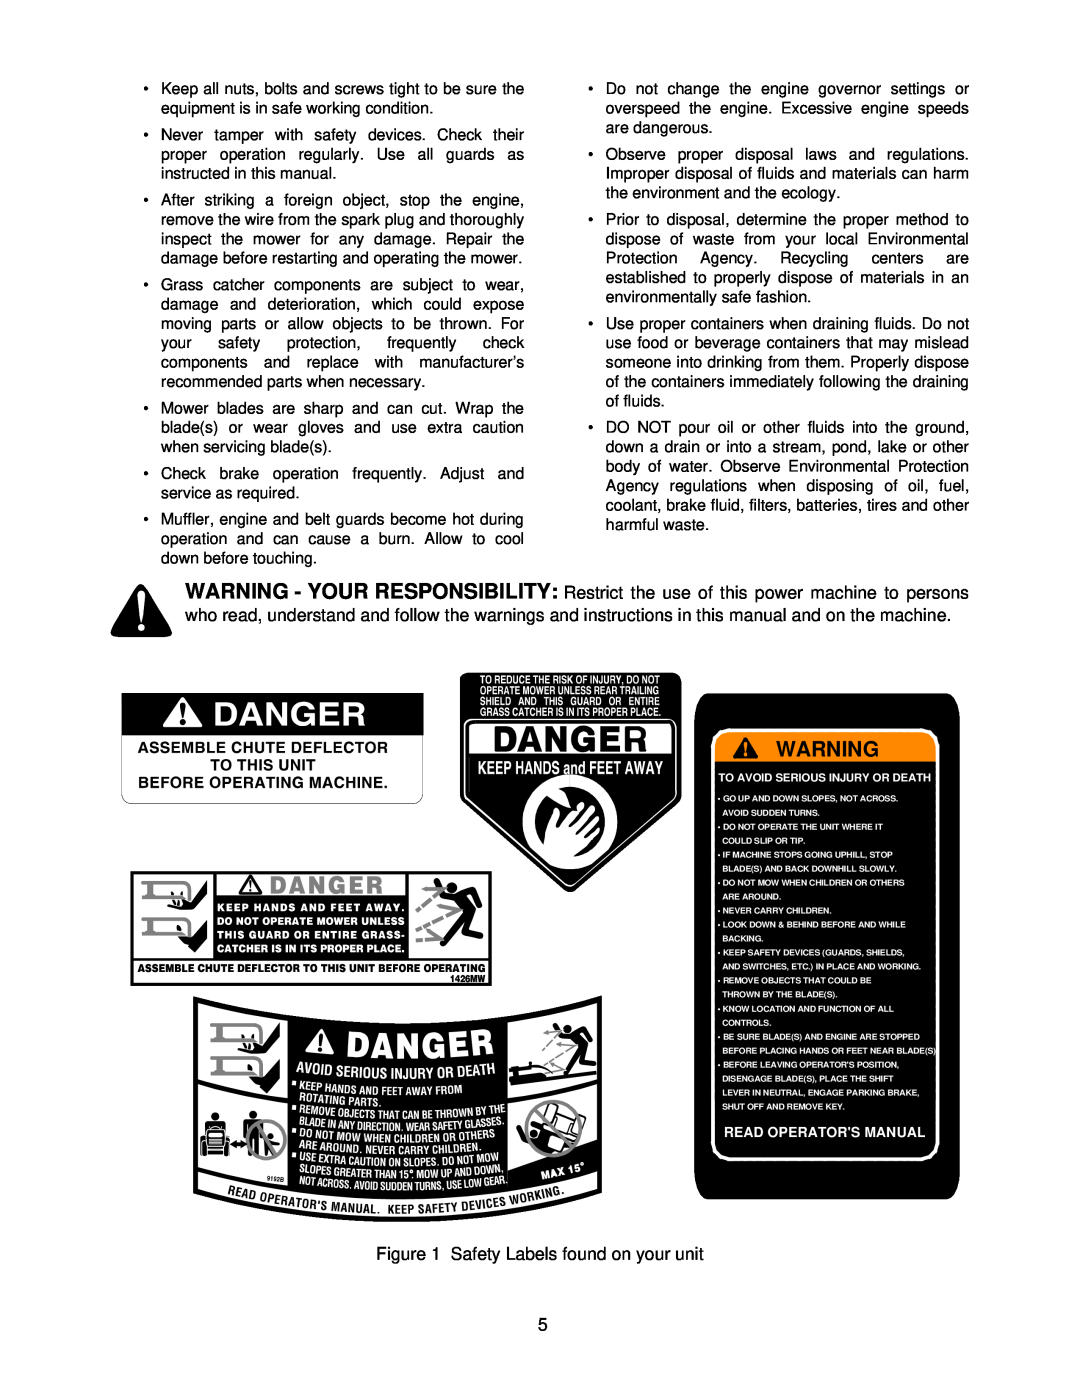 Yard-Man 247.27432 manual Safety Labels found on your unit 